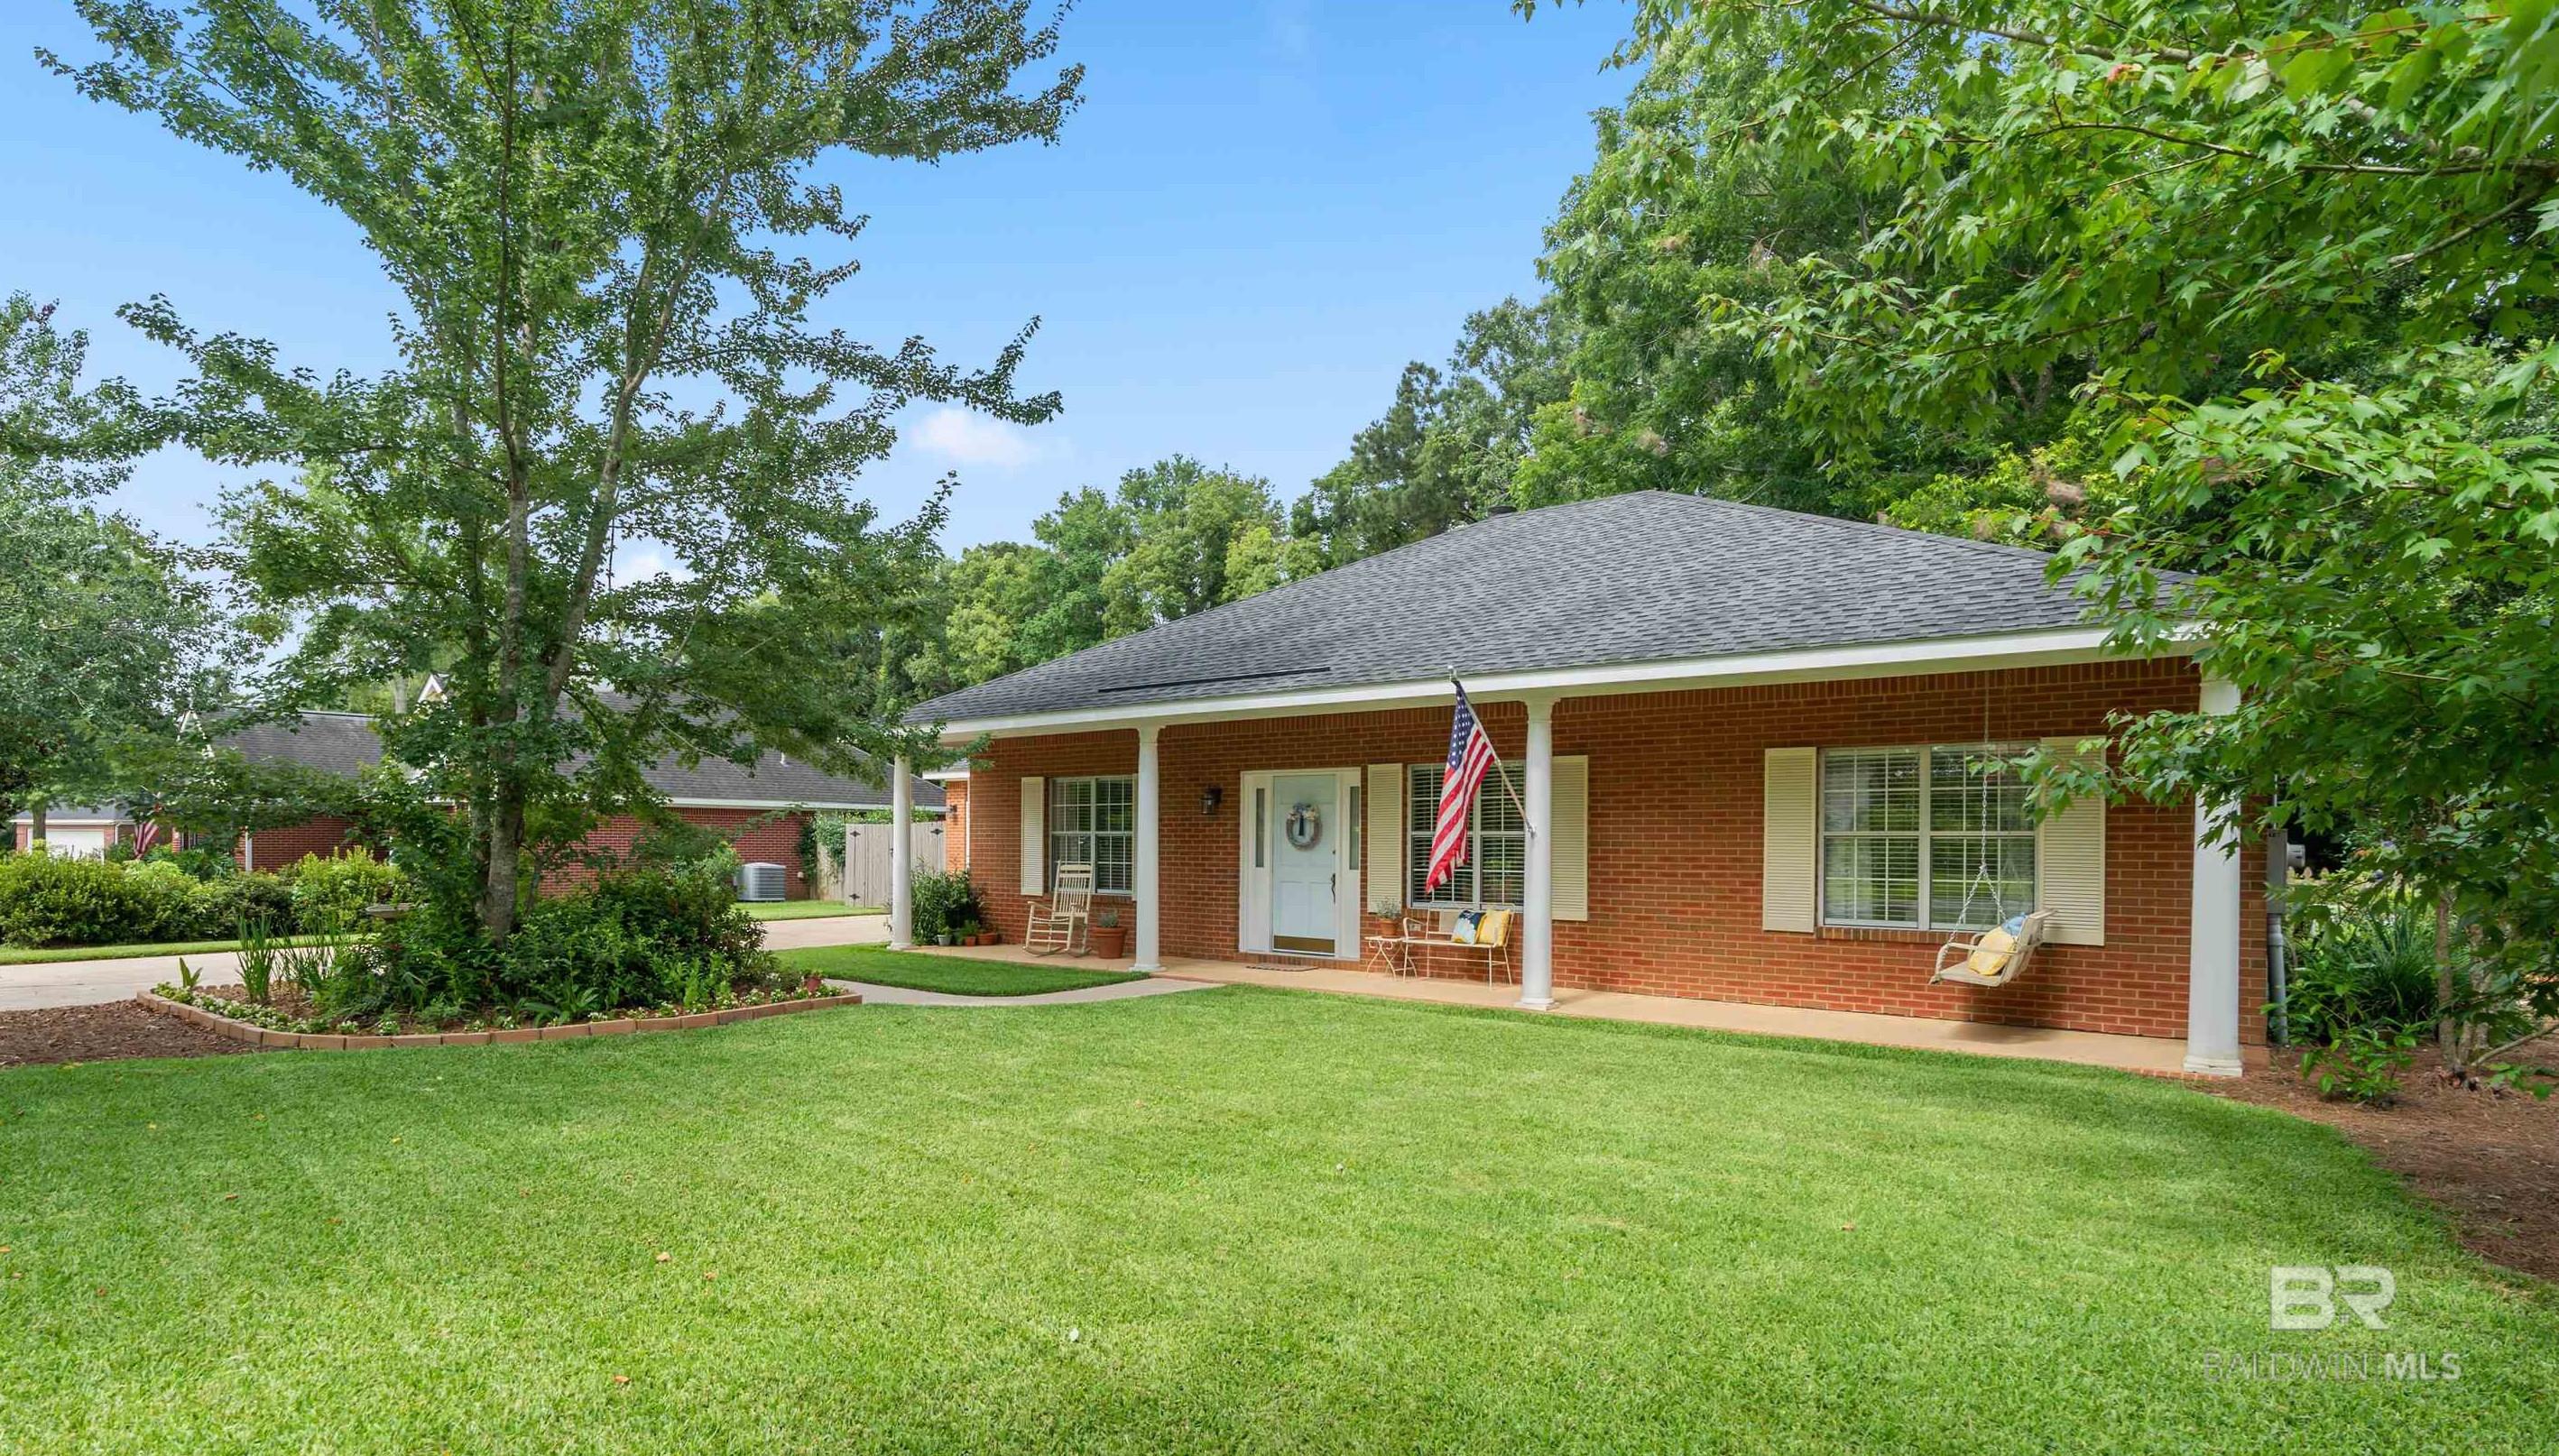 Welcome Home! This classic, well-maintained brick home in a small neighborhood located between Hwy 98 and Hwy 181 could be your next Home Sweet Home. The beauty starts with the curb appeal thanks to the wide covered front porch and the mature landscaping. Inside you will find fresh paint, beautiful parquet floors, and brand new carpet in the bedrooms. The Bronze fortified roof is only 5 years old! Need space? In addition to the 3 bedrooms and 2 full baths, this home also has a spacious living room, a bonus room, and a sunroom. Enjoy your morning coffee from the sunroom just off the spacious kitchen and overlooking the private, fenced backyard. Additional perks include the vaulted ceilings, split floorplan, and the adorable back deck. Parking will not be an issue due to the 2 car attached garage and room for more cars in the driveway. White Grove is a quaint neighborhood with mature trees and sidewalks ideal for an evening stroll. It is conveniently located only a mile from Wal-Mart and just 4 miles from the local shopping and dining of Downtown Fairhope. Call your favorite realtor to see this before it's gone. All information is deemed reliable but must be confirmed by buyer.